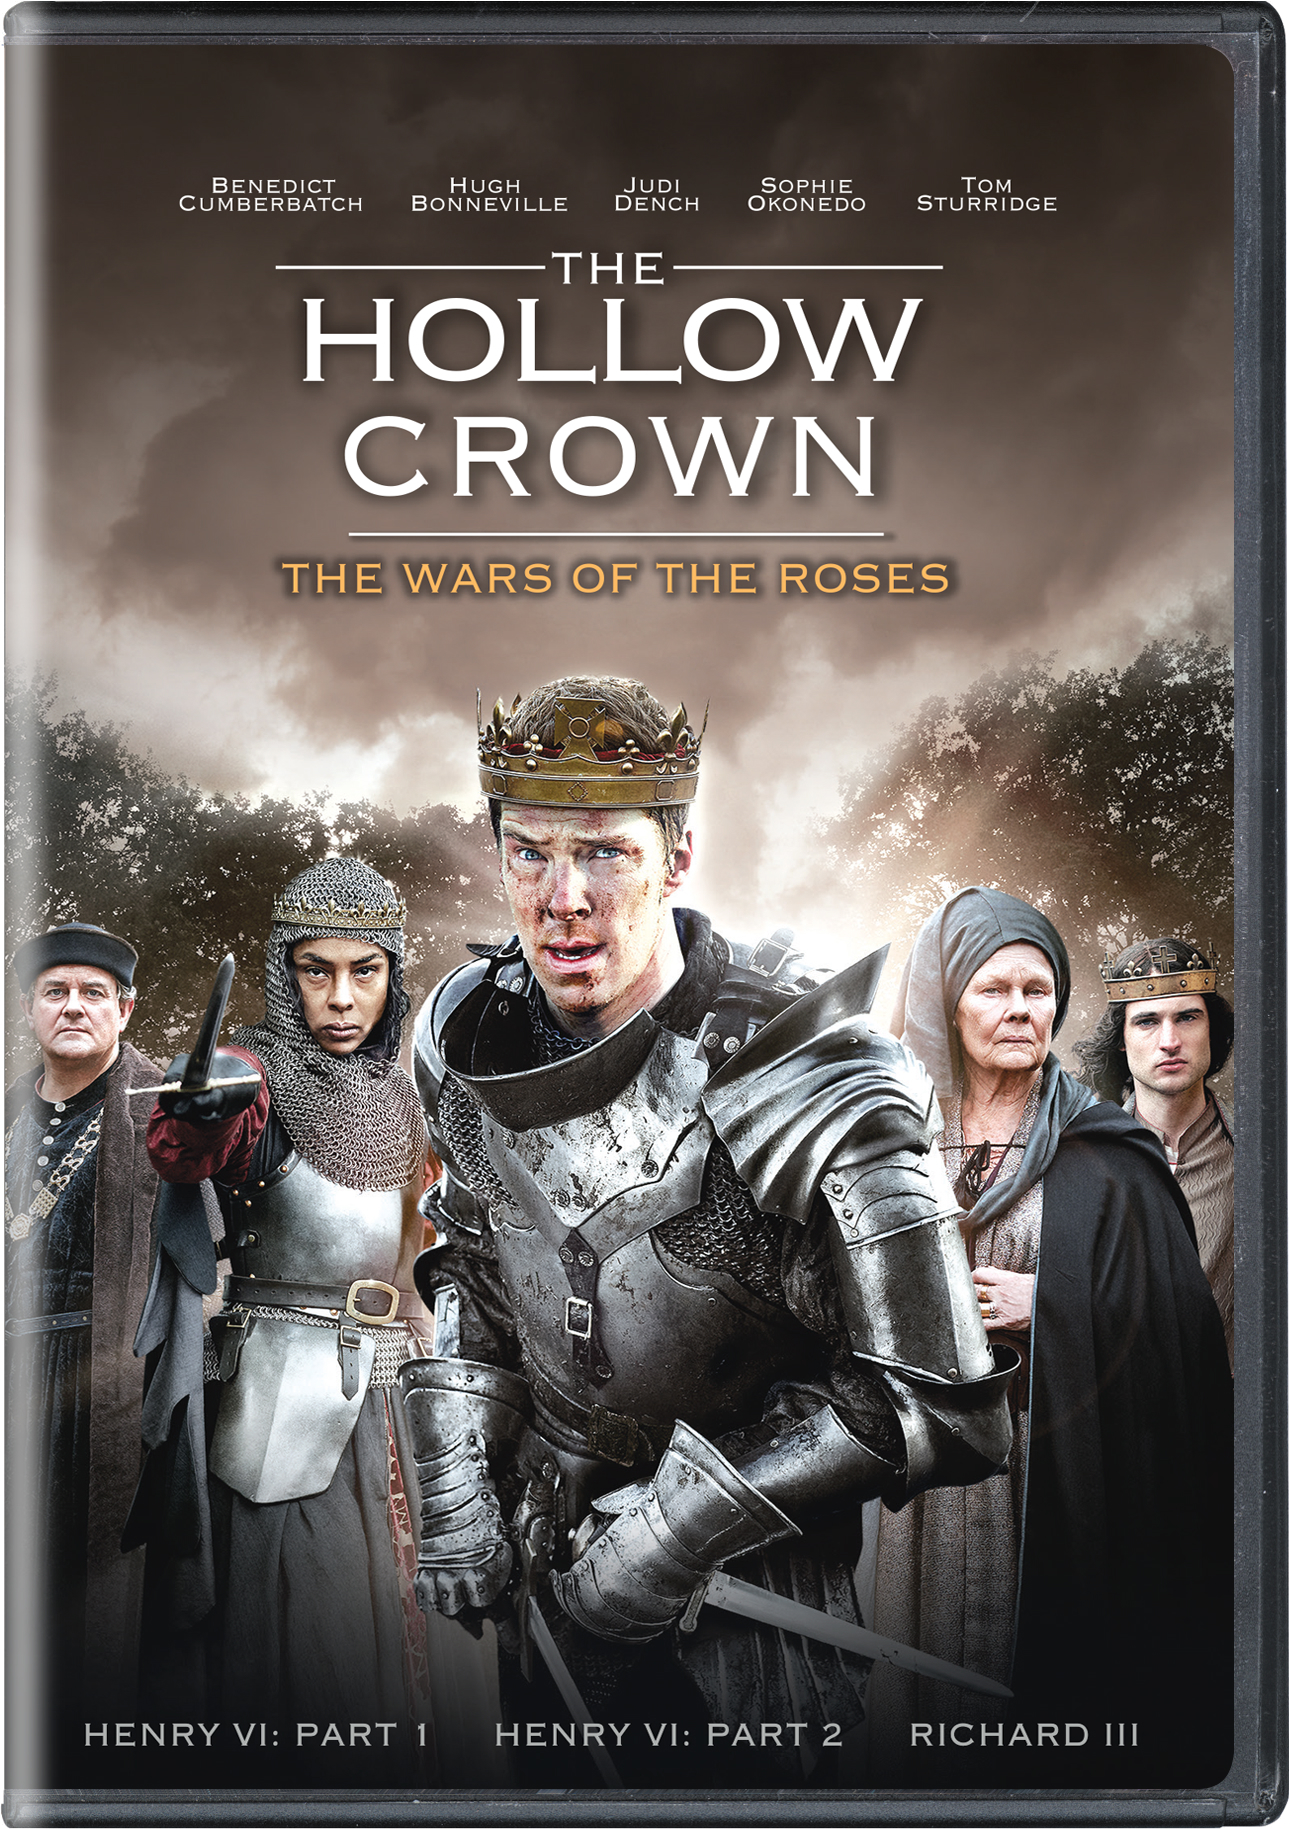 The Hollow Crown: The Wars Of The Roses - DVD [ 2016 ]  - Drama Television On DVD - TV Shows On GRUV